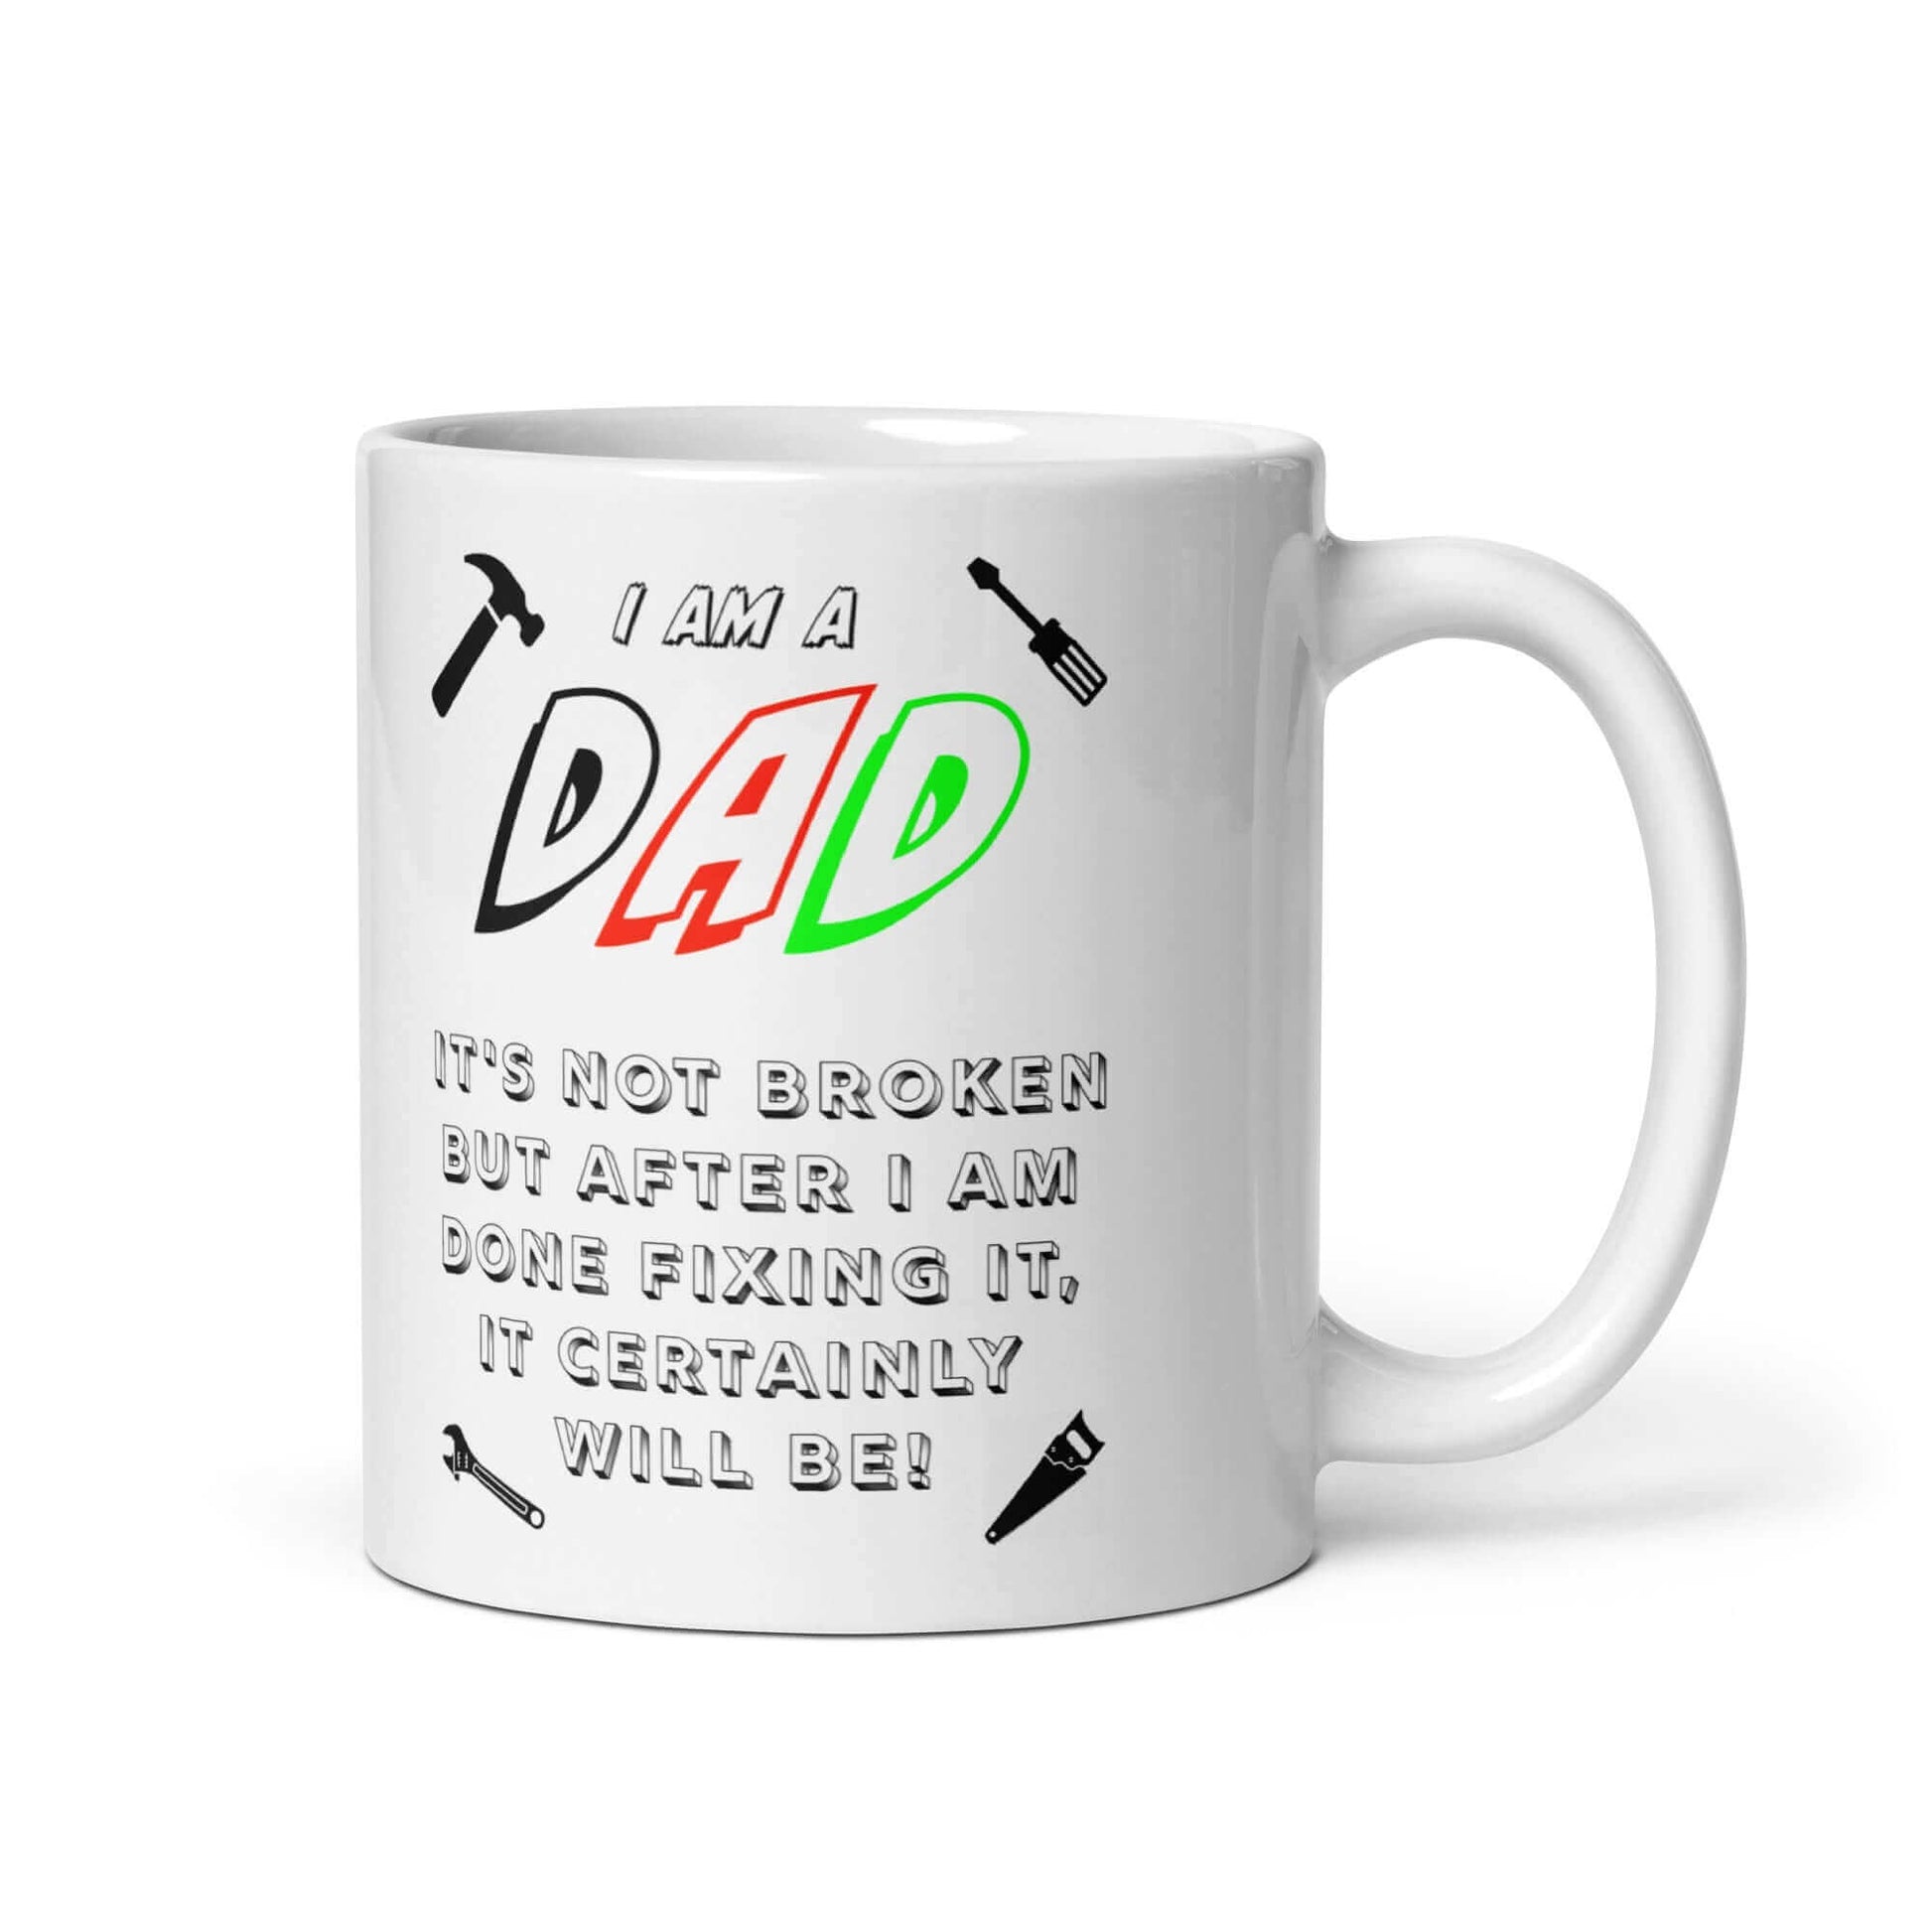 I am a DAD. It is not broken, but after I am done fixing it, it certainly will be ! - White glossy mug adult mug coffee mug dad dads day dads day gift dishwasher safe mug Fahters day fathers fathers day fixing funny coffee mug funny mug gift for dad gift idea mug super dad